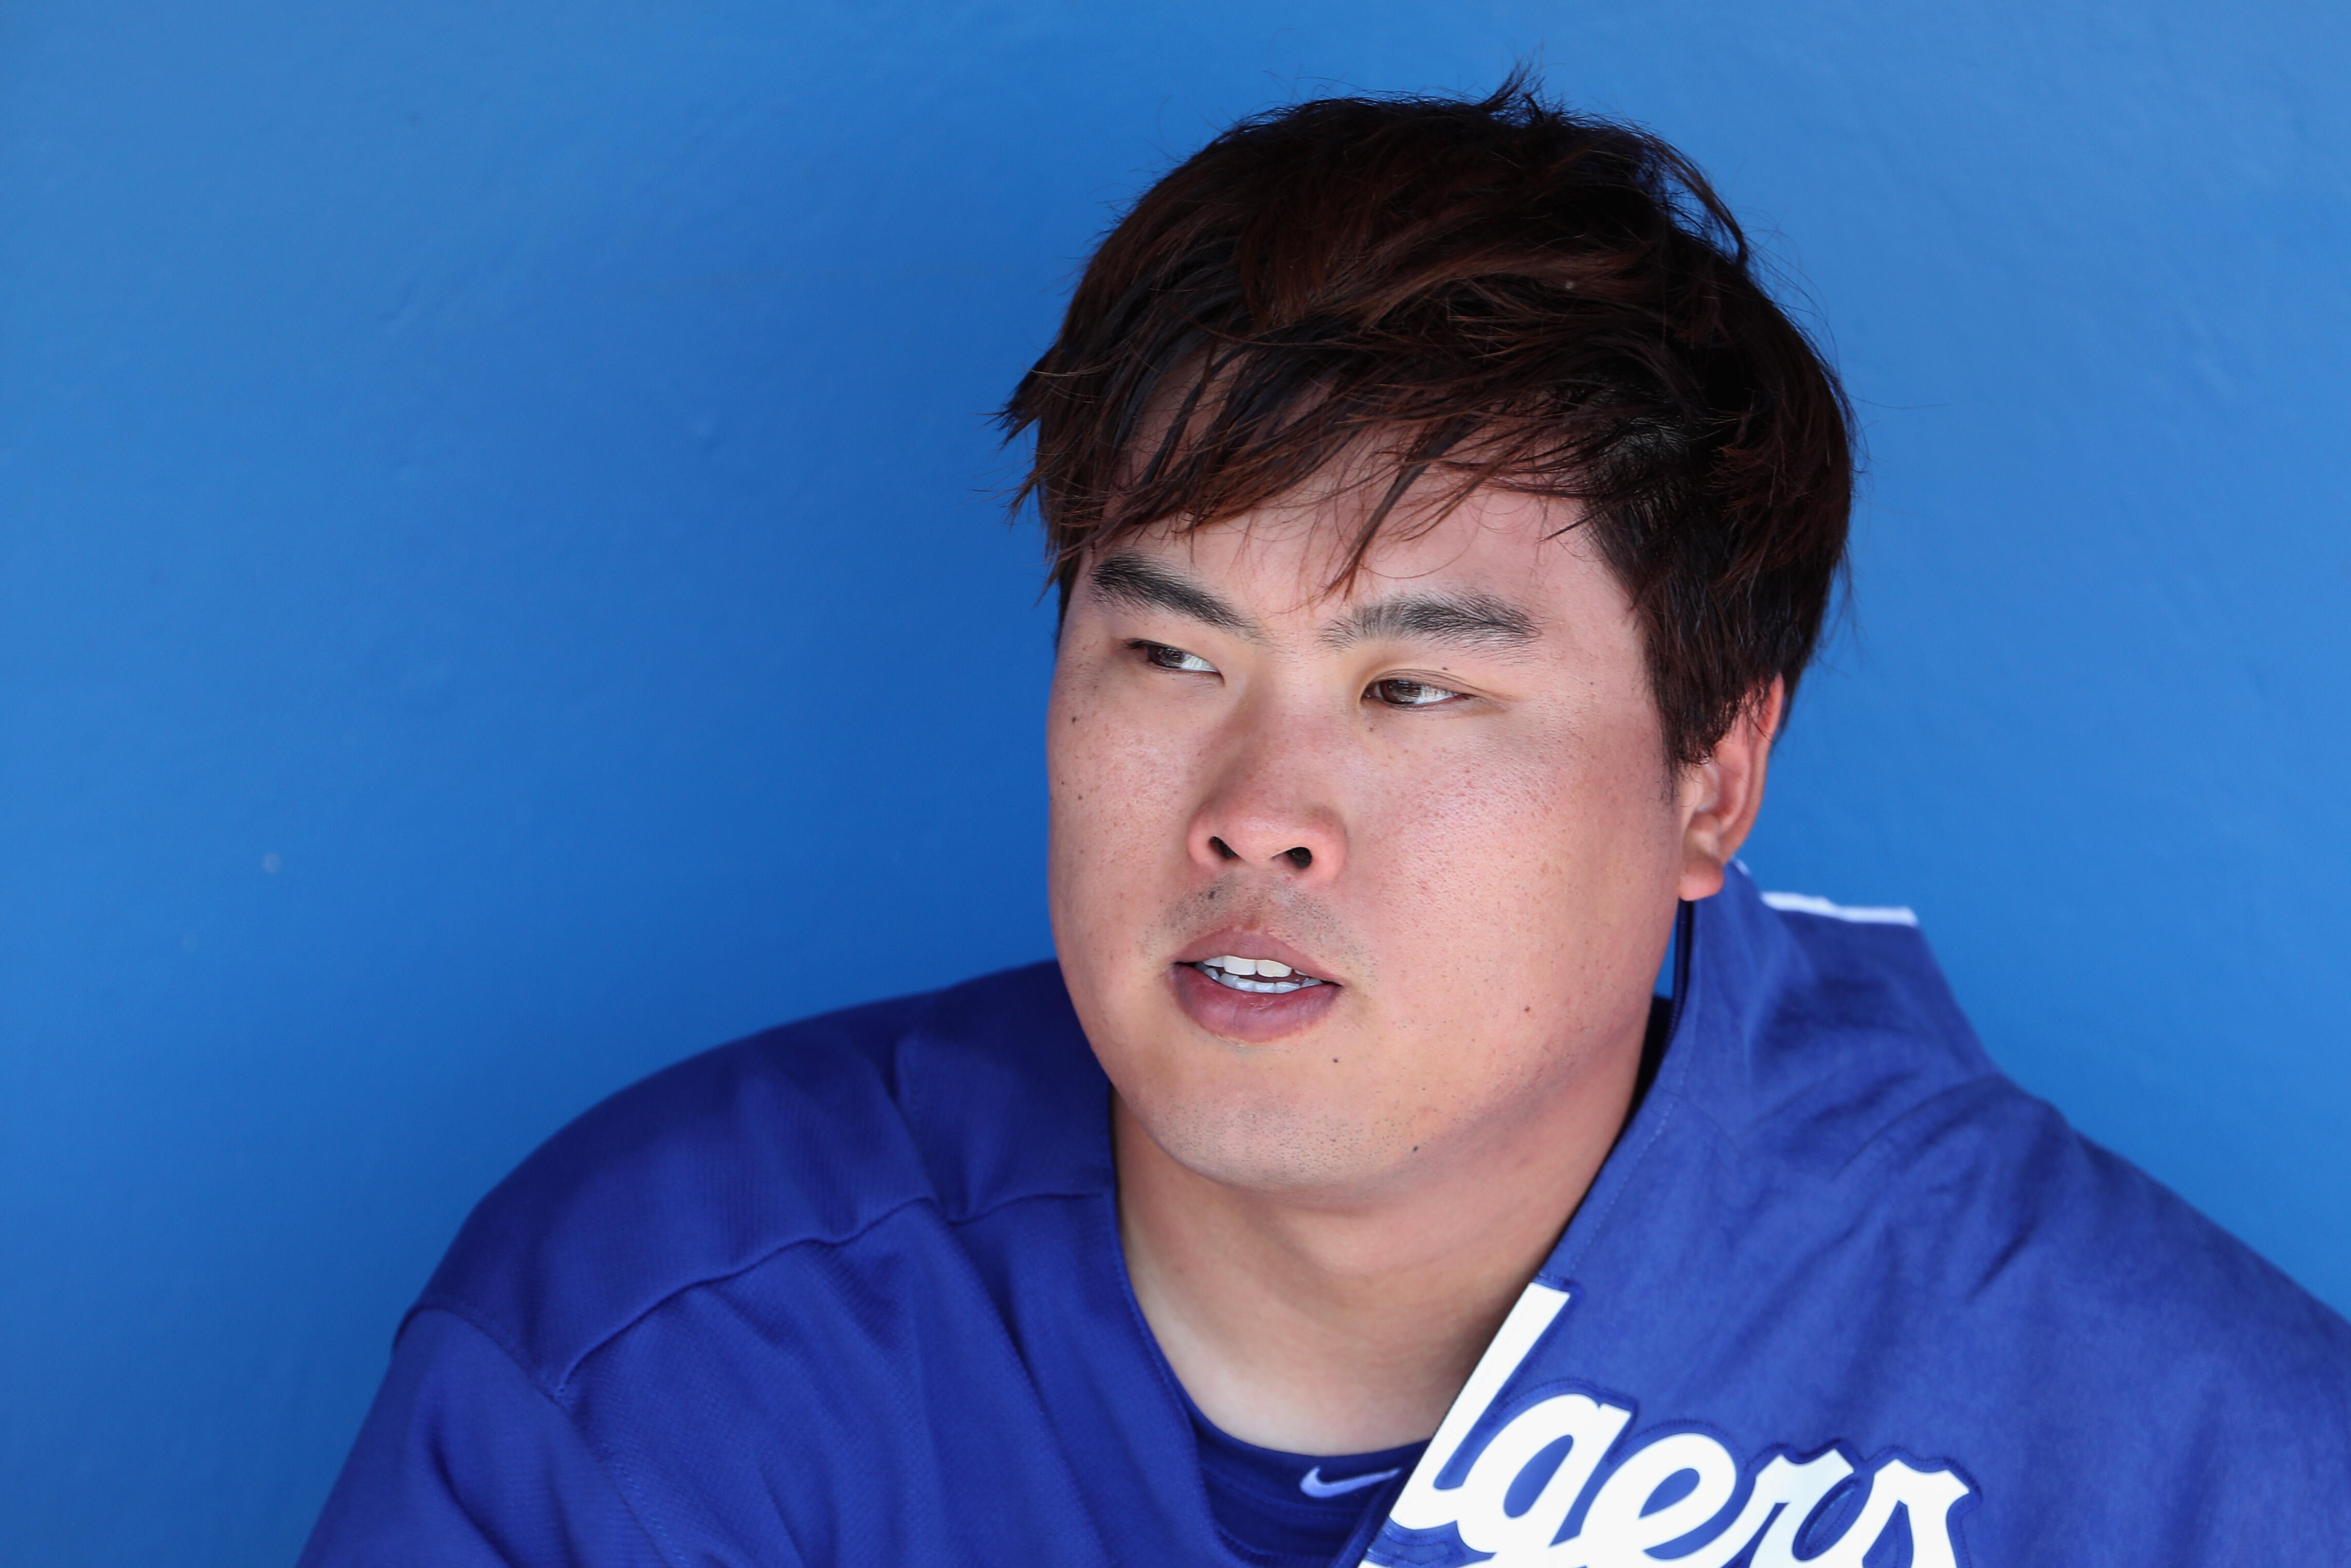 GLENDALE, AZ - MARCH 11:  Starting pitcher Hyun-Jin Ryu #99 of the Los Angeles Dodgers sits in the dugout before the spring training MLB game against the Los Angeles Angels at Camelback Ranch on March 11, 2017 in Glendale, Arizona.  (Photo by Christian Pe